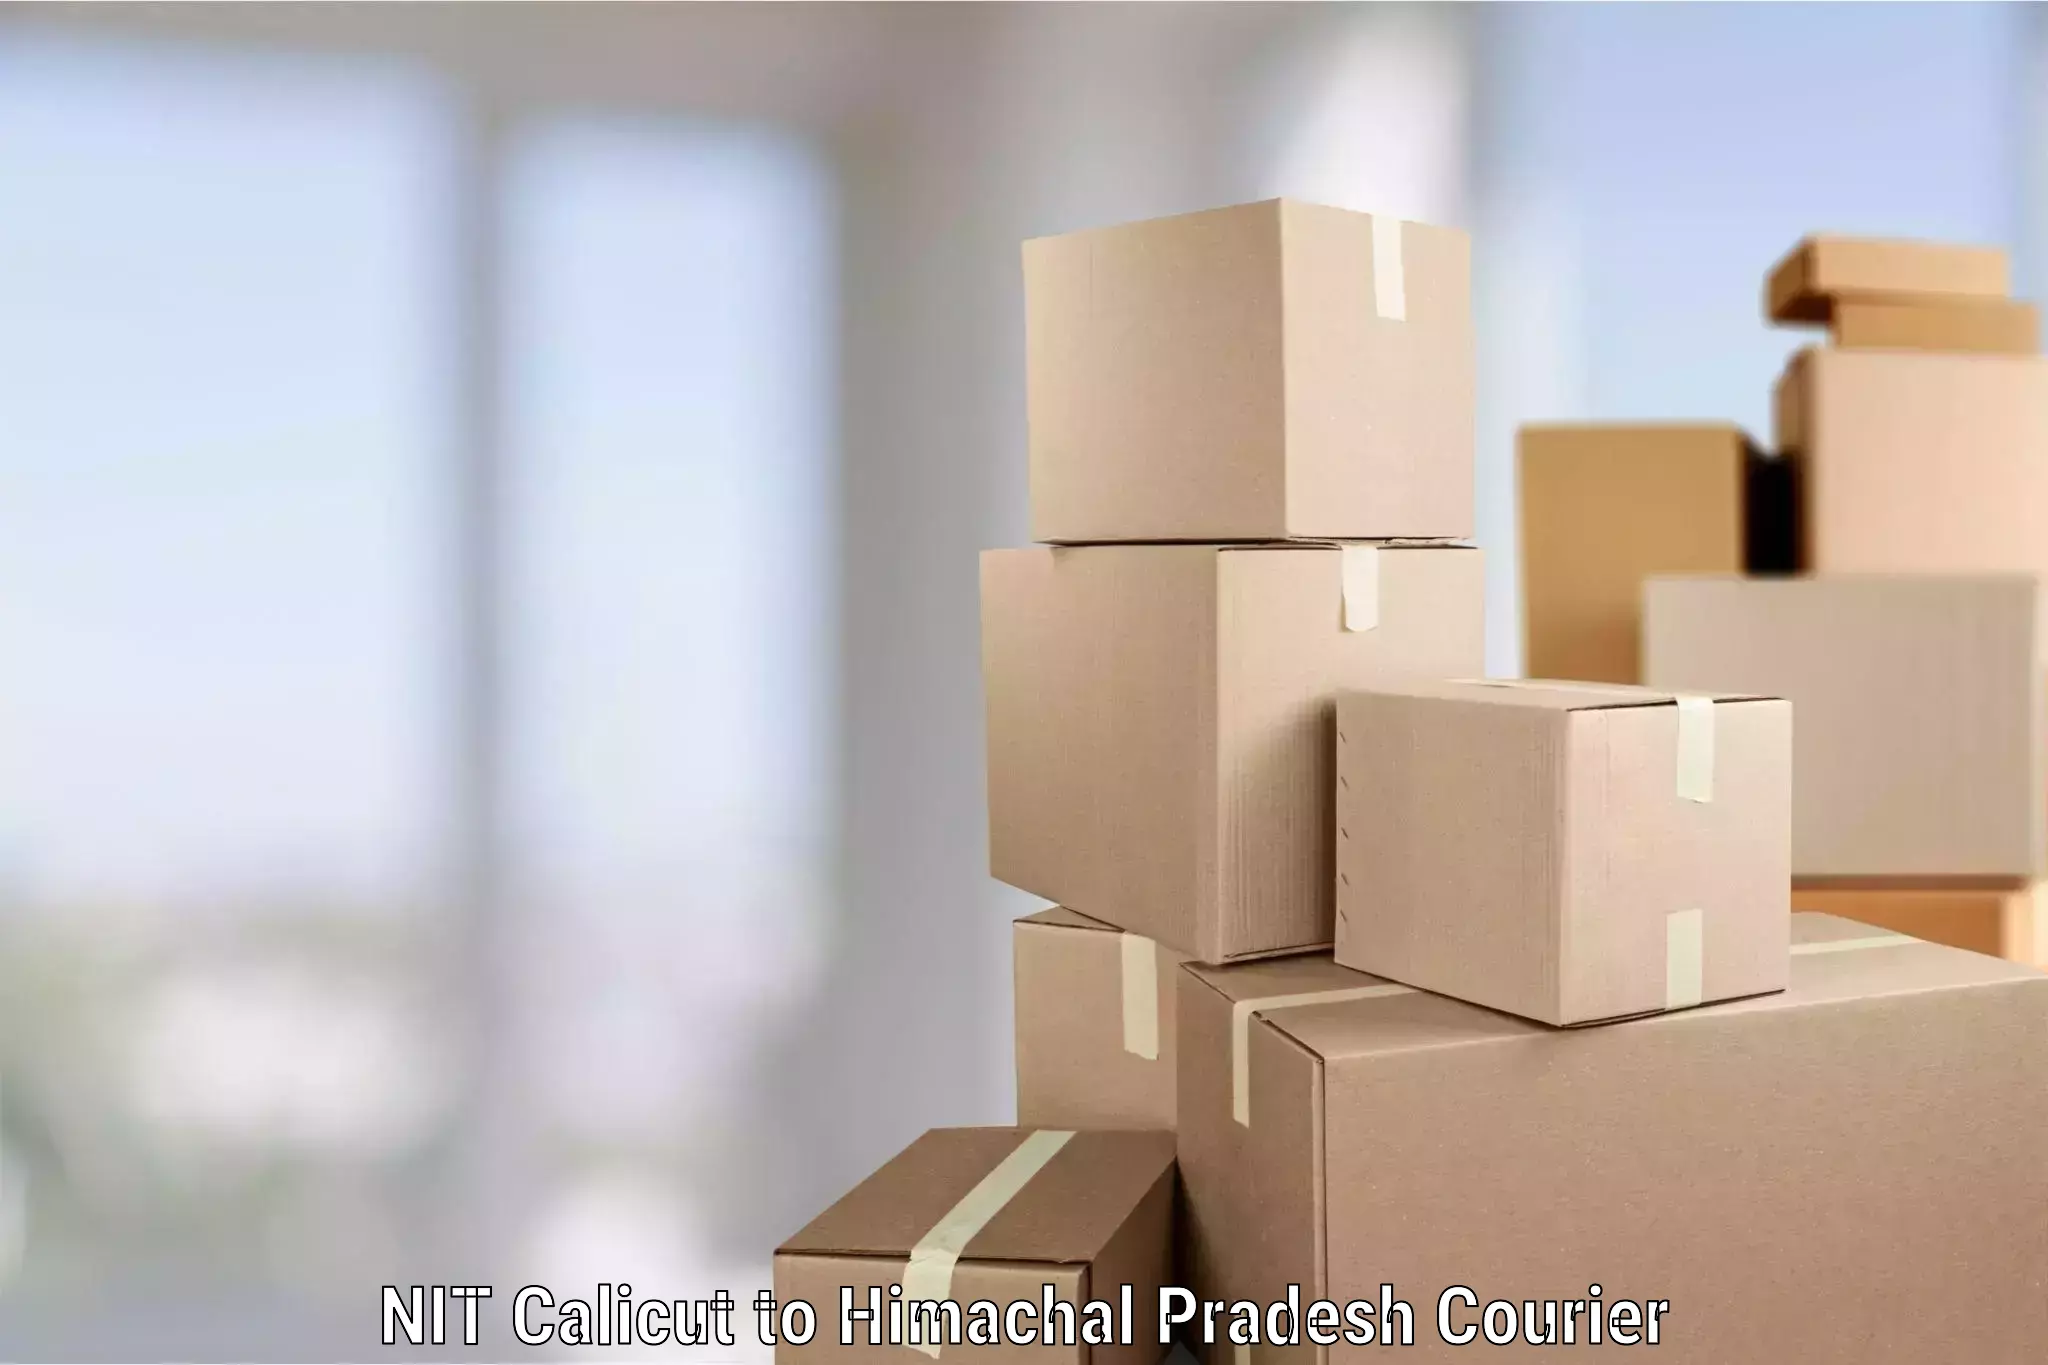 Professional moving assistance in NIT Calicut to Himachal Pradesh